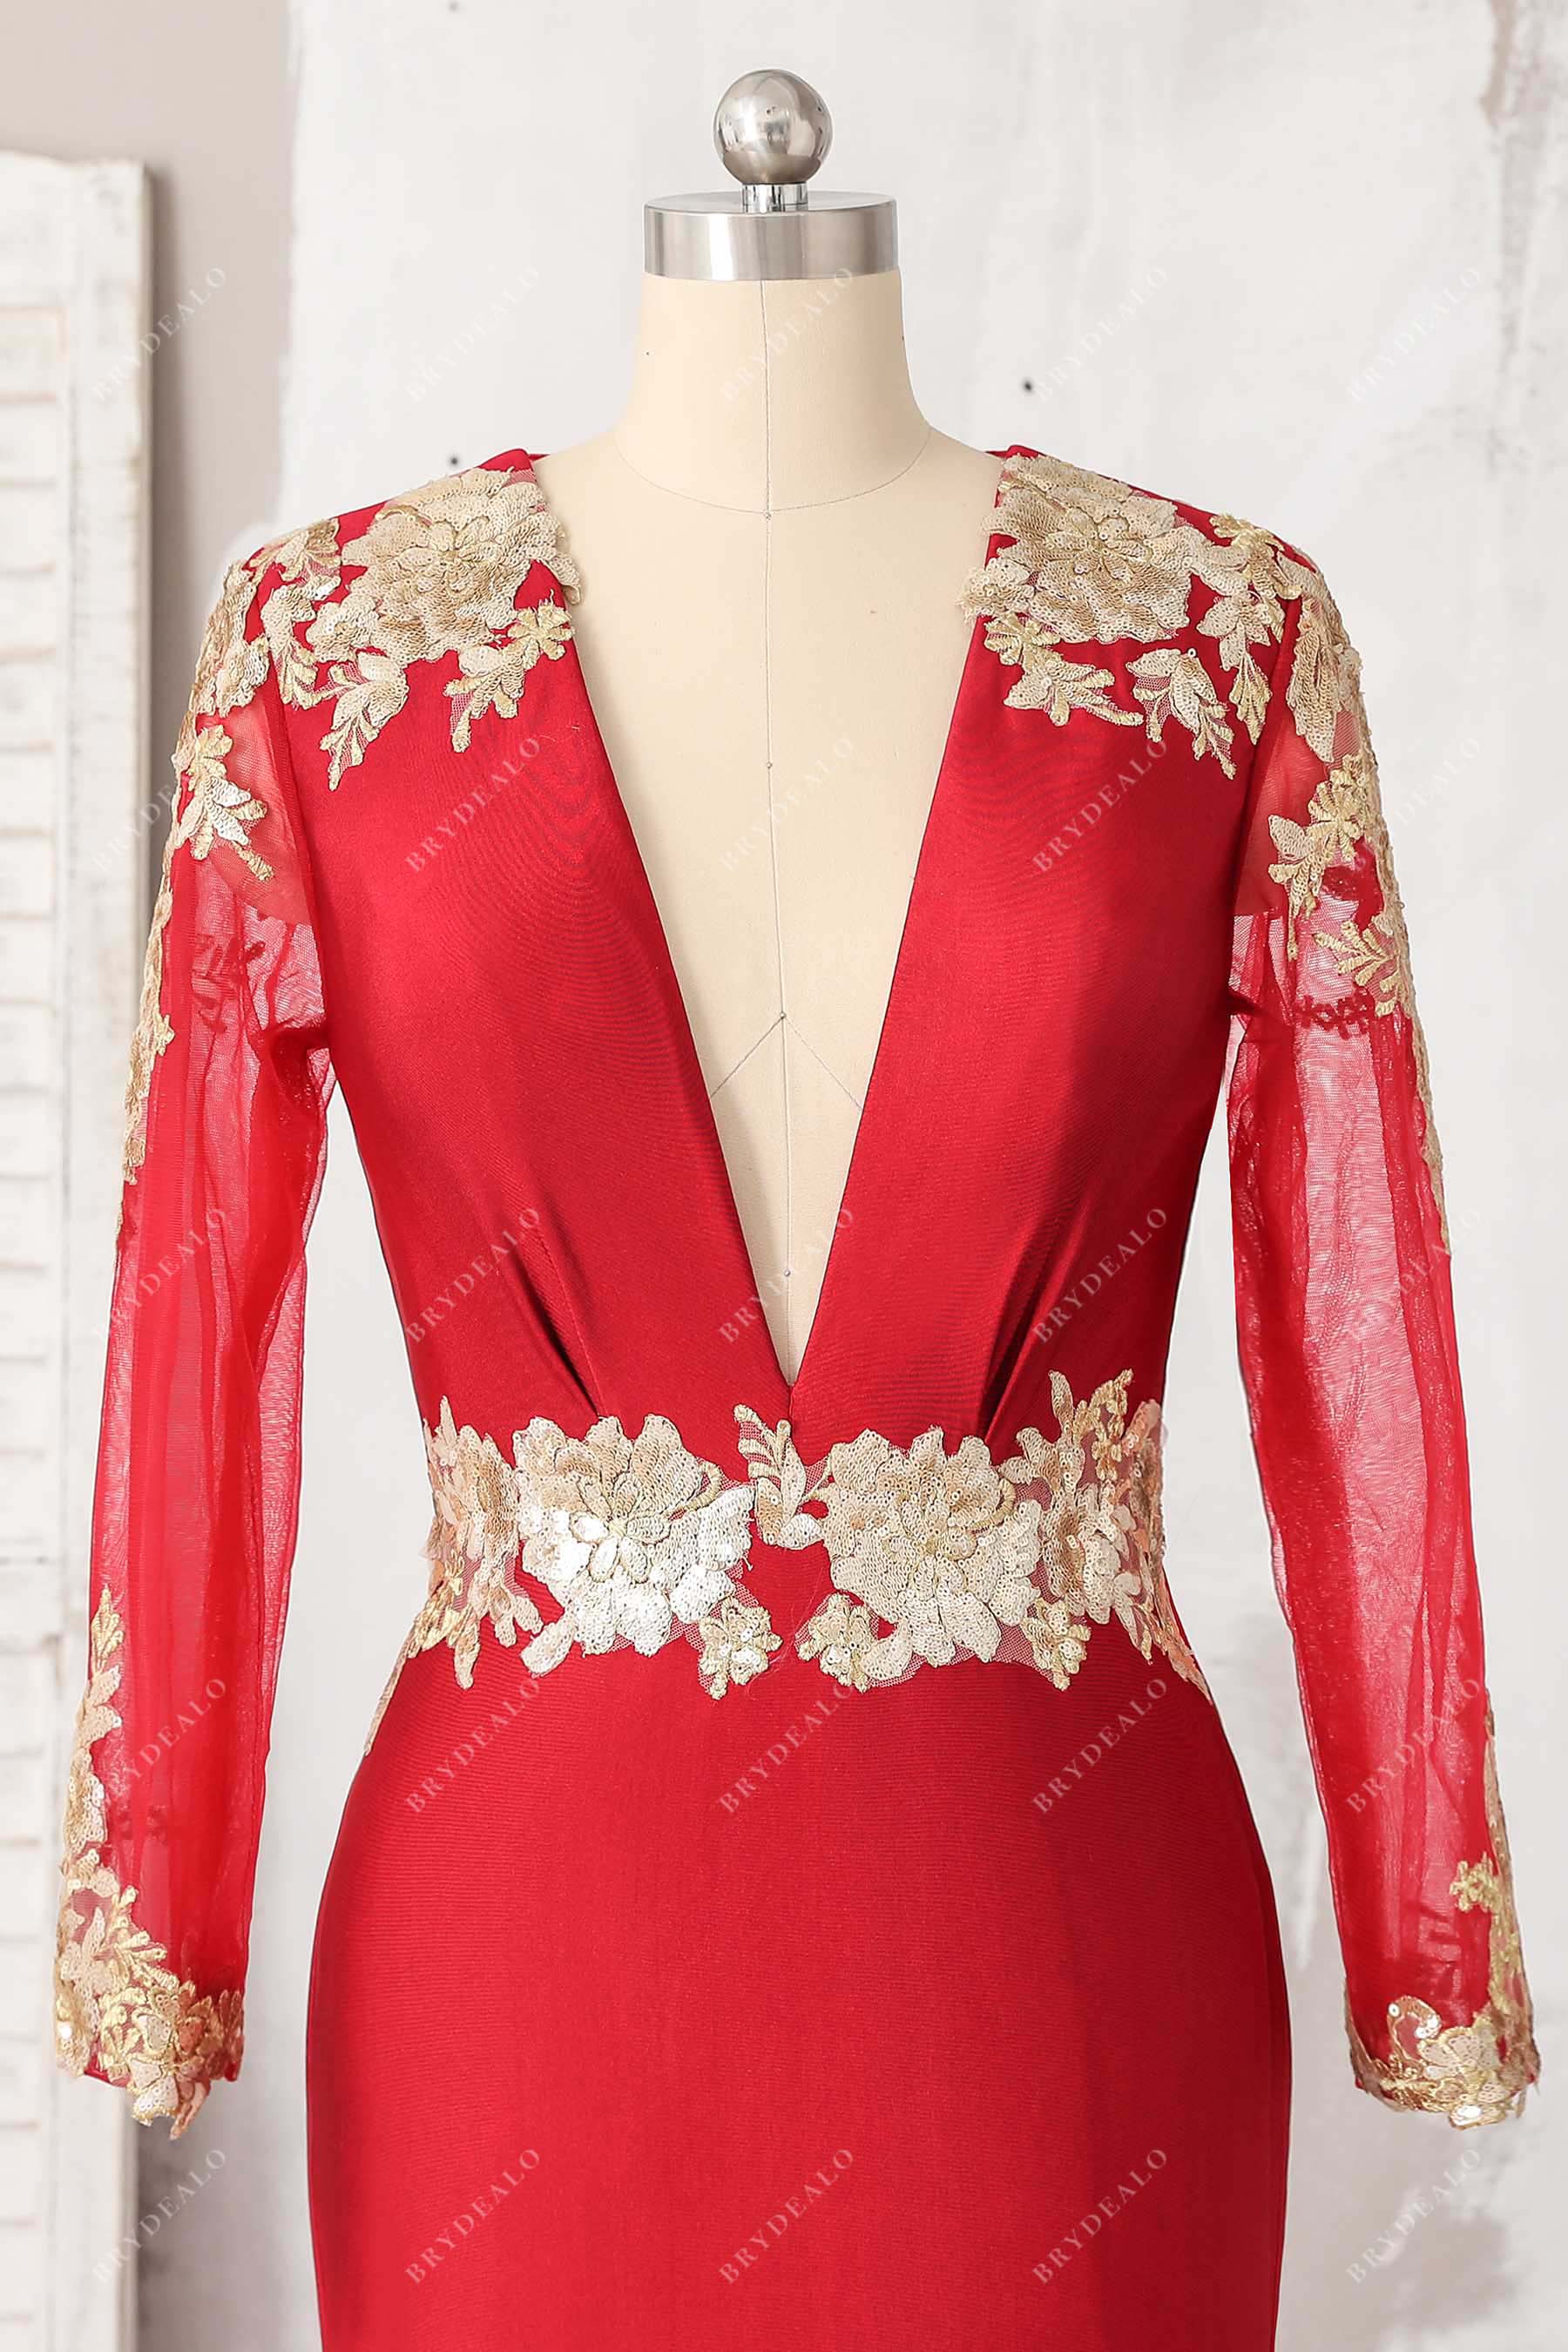 gold lace red jersey prom dress